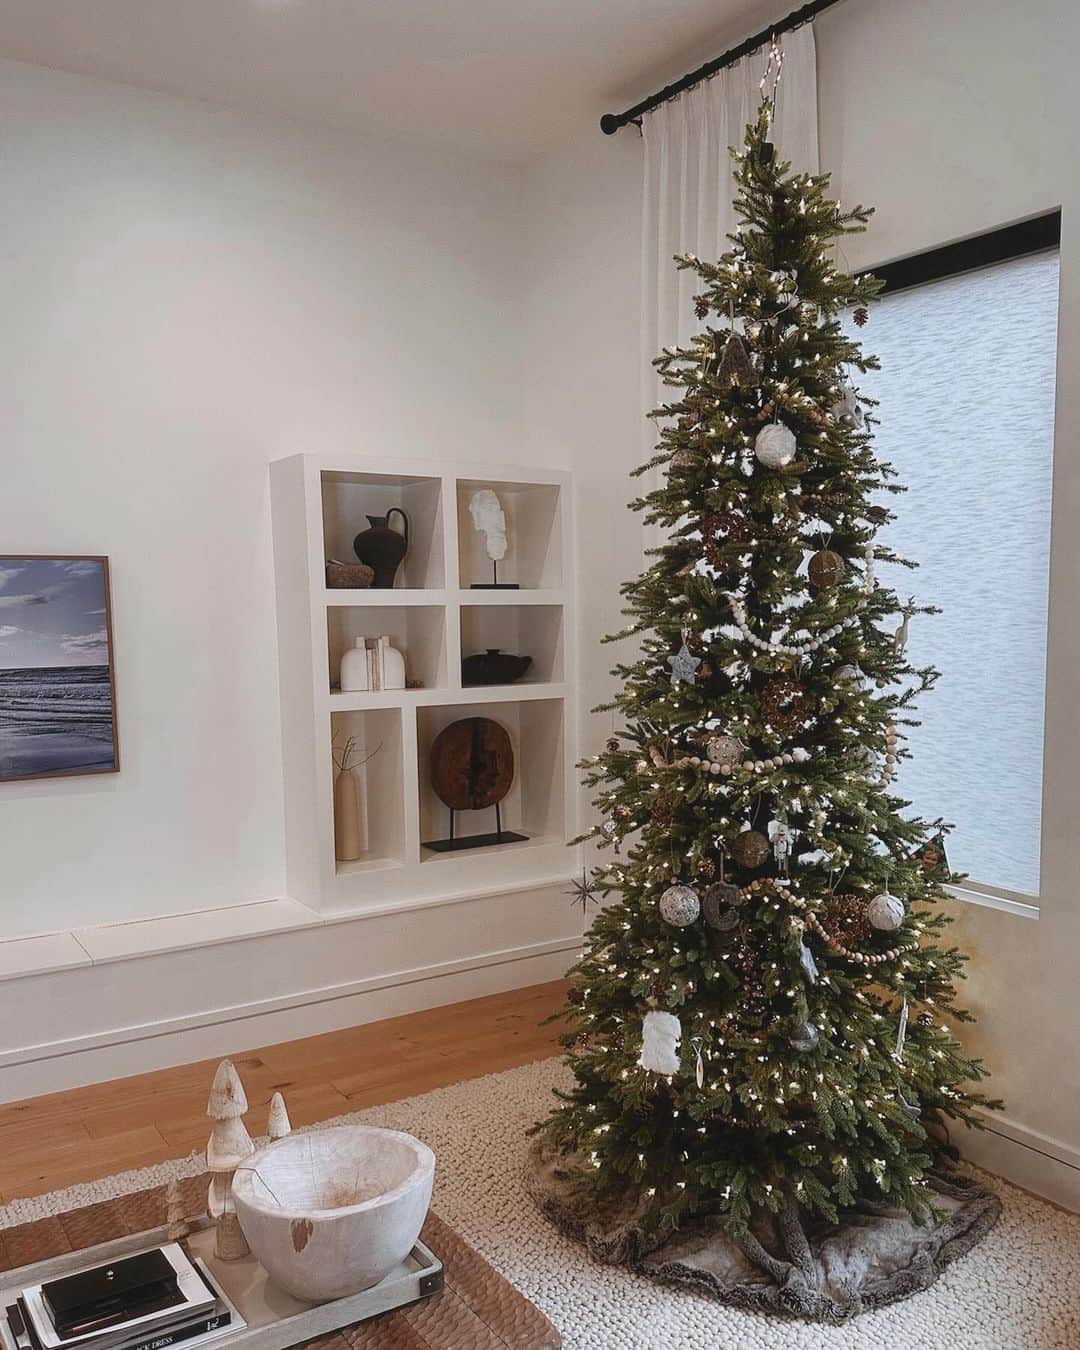 Cara Van Brocklinのインスタグラム：「Cozied up the house a bit this Sunday afternoon 🌲. When do you normally put your Christmas decor up? Mine is usually the week of Thanksgiving because I want it up long enough because it’s a lot of effort, but not too long either haha」